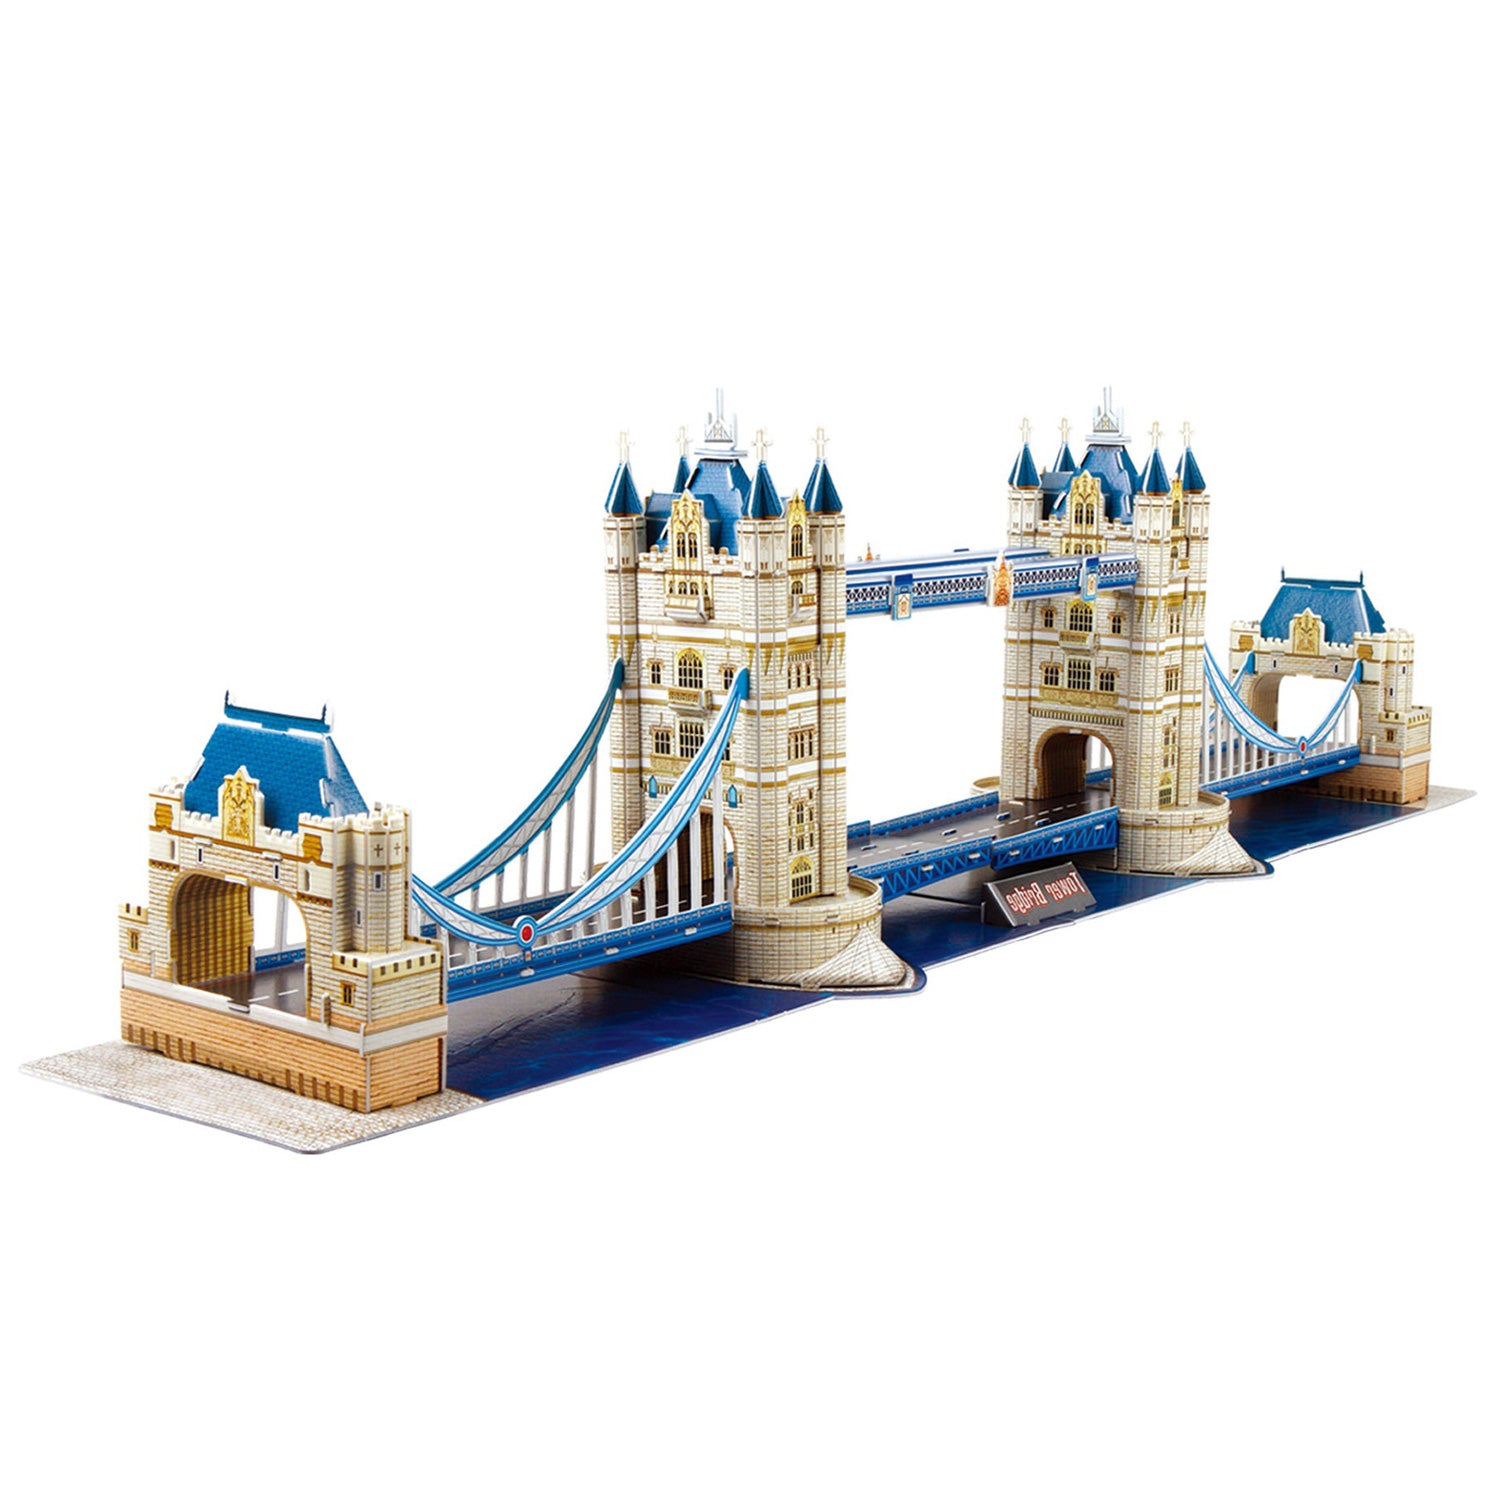 Assembled National Geographic Tower Bridge Model